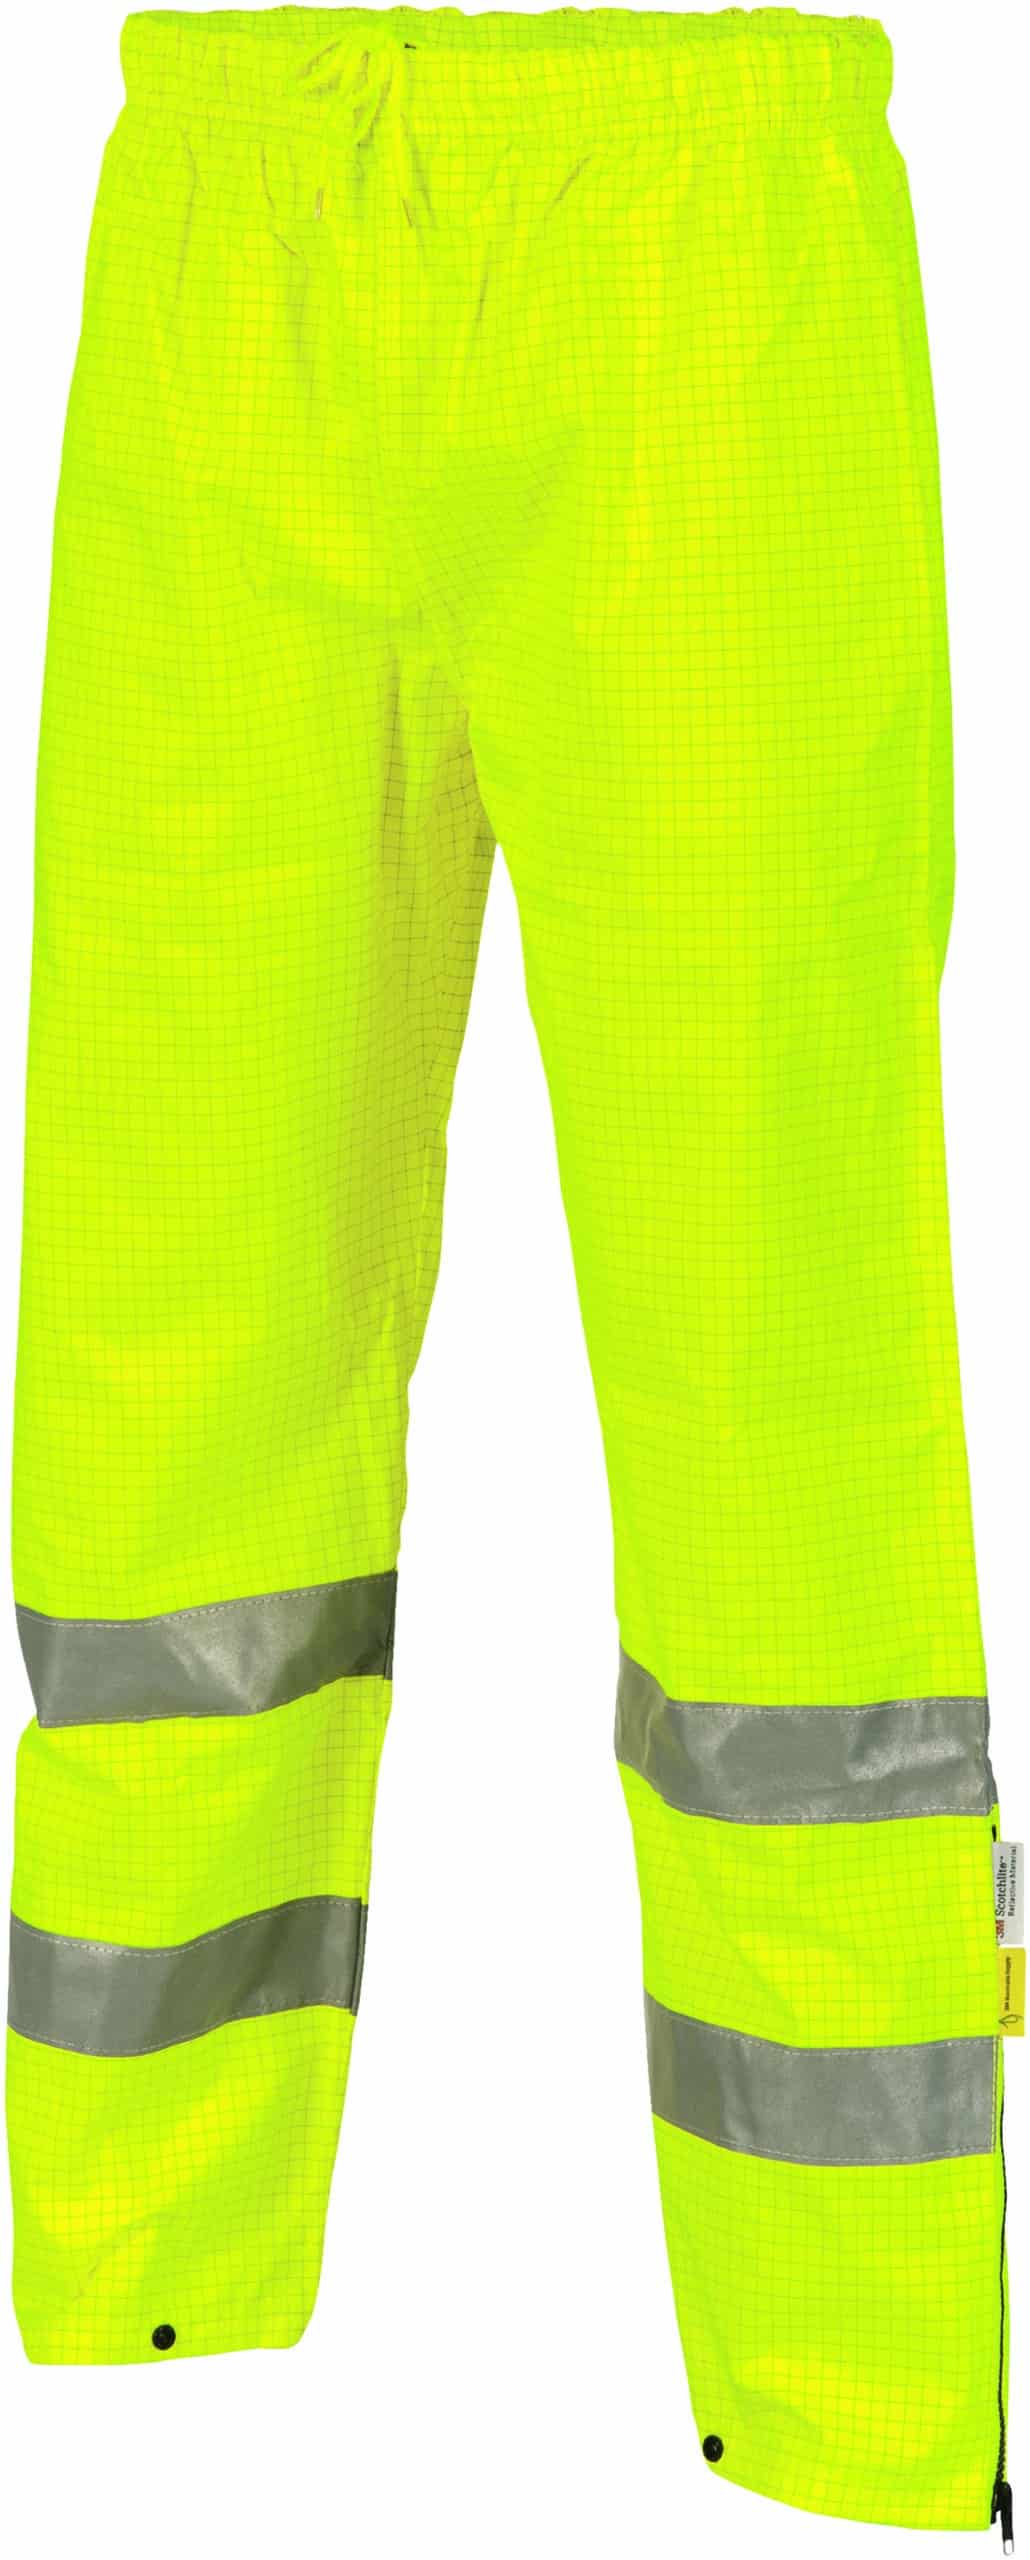 DNC Workwear Hi Vis Breathable and Anti-Static Pants with 3M Reflective Tape